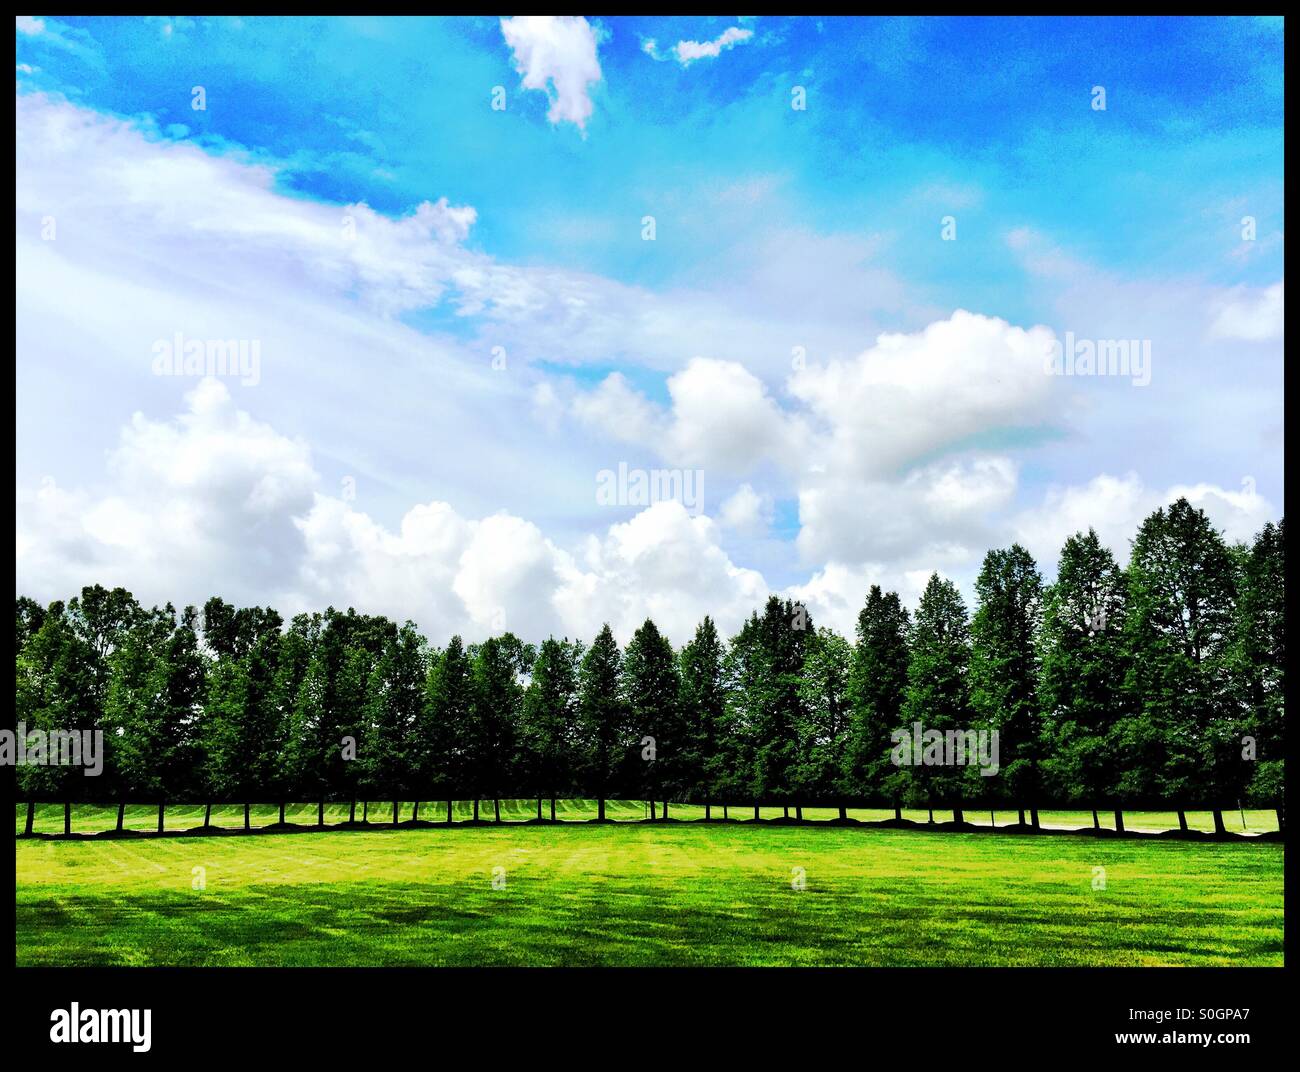 A clear sunny day. Stock Photo